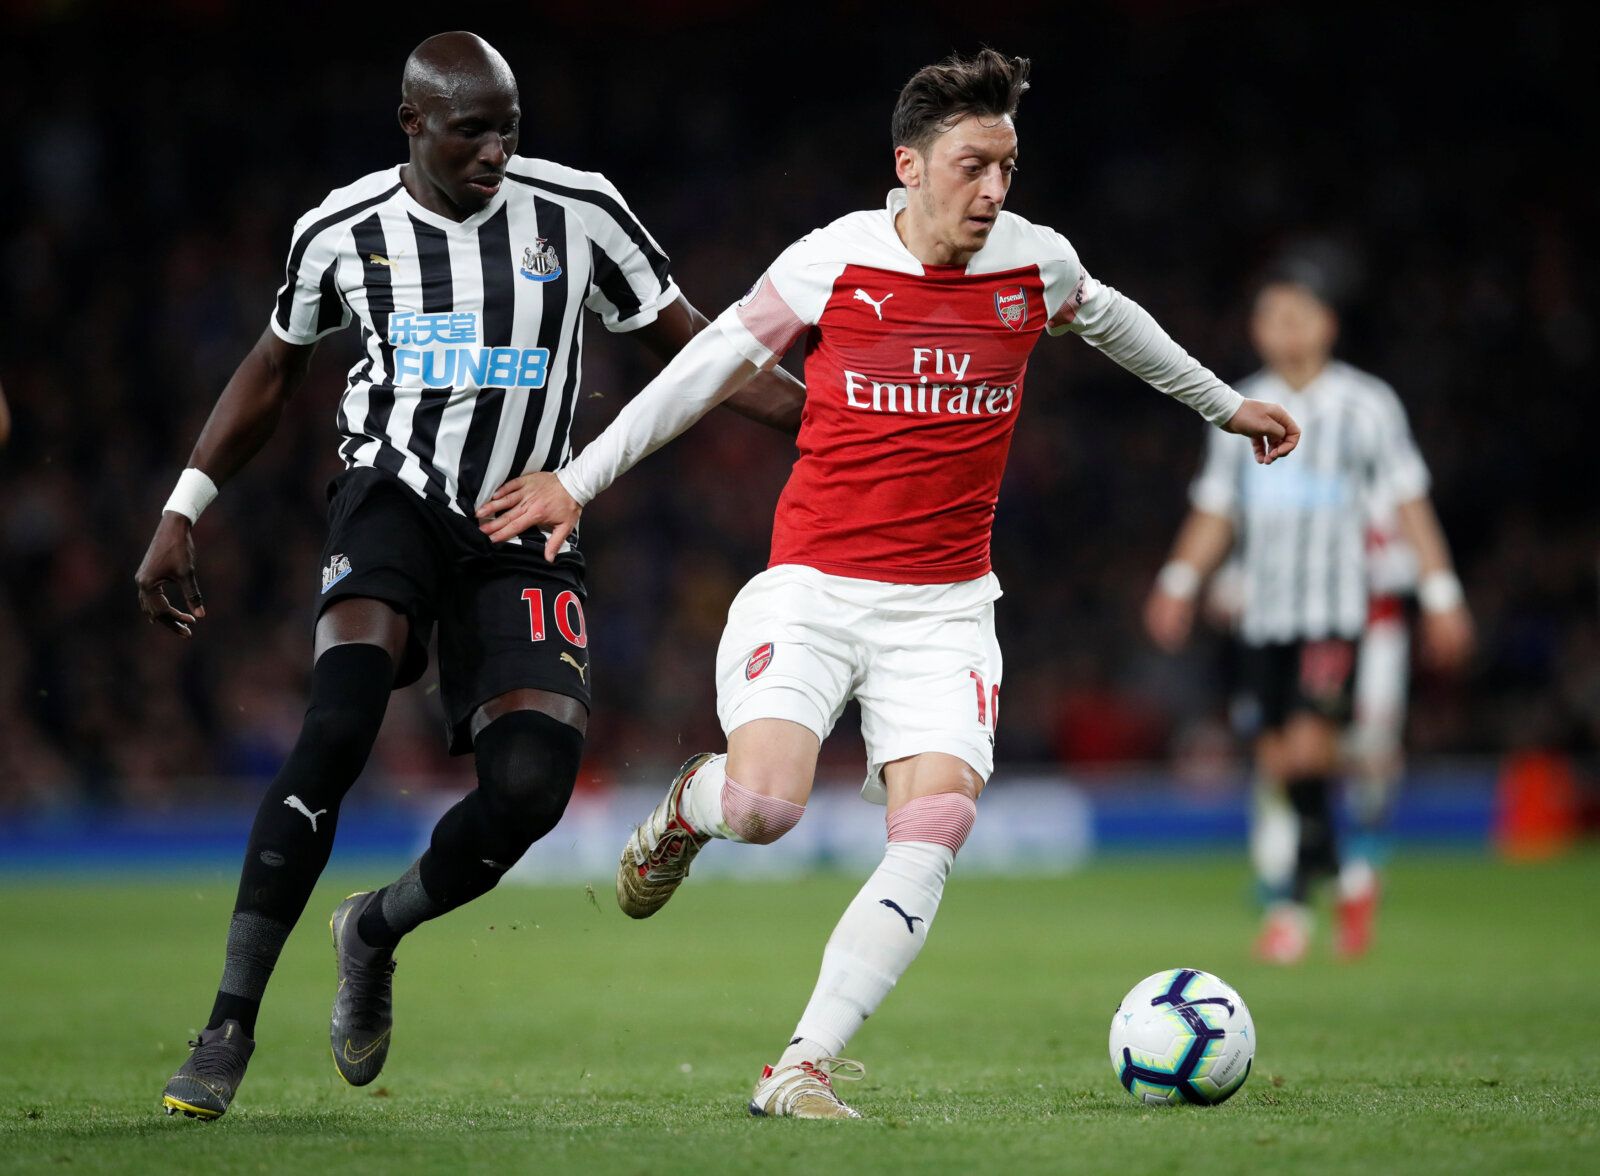 Soccer Football - Premier League - Arsenal v Newcastle United - Emirates Stadium, London, Britain - April 1, 2019  Arsenal's Mesut Ozil in action with Newcastle United's Mohamed Diame   REUTERS/David Klein  EDITORIAL USE ONLY. No use with unauthorized audio, video, data, fixture lists, club/league logos or 